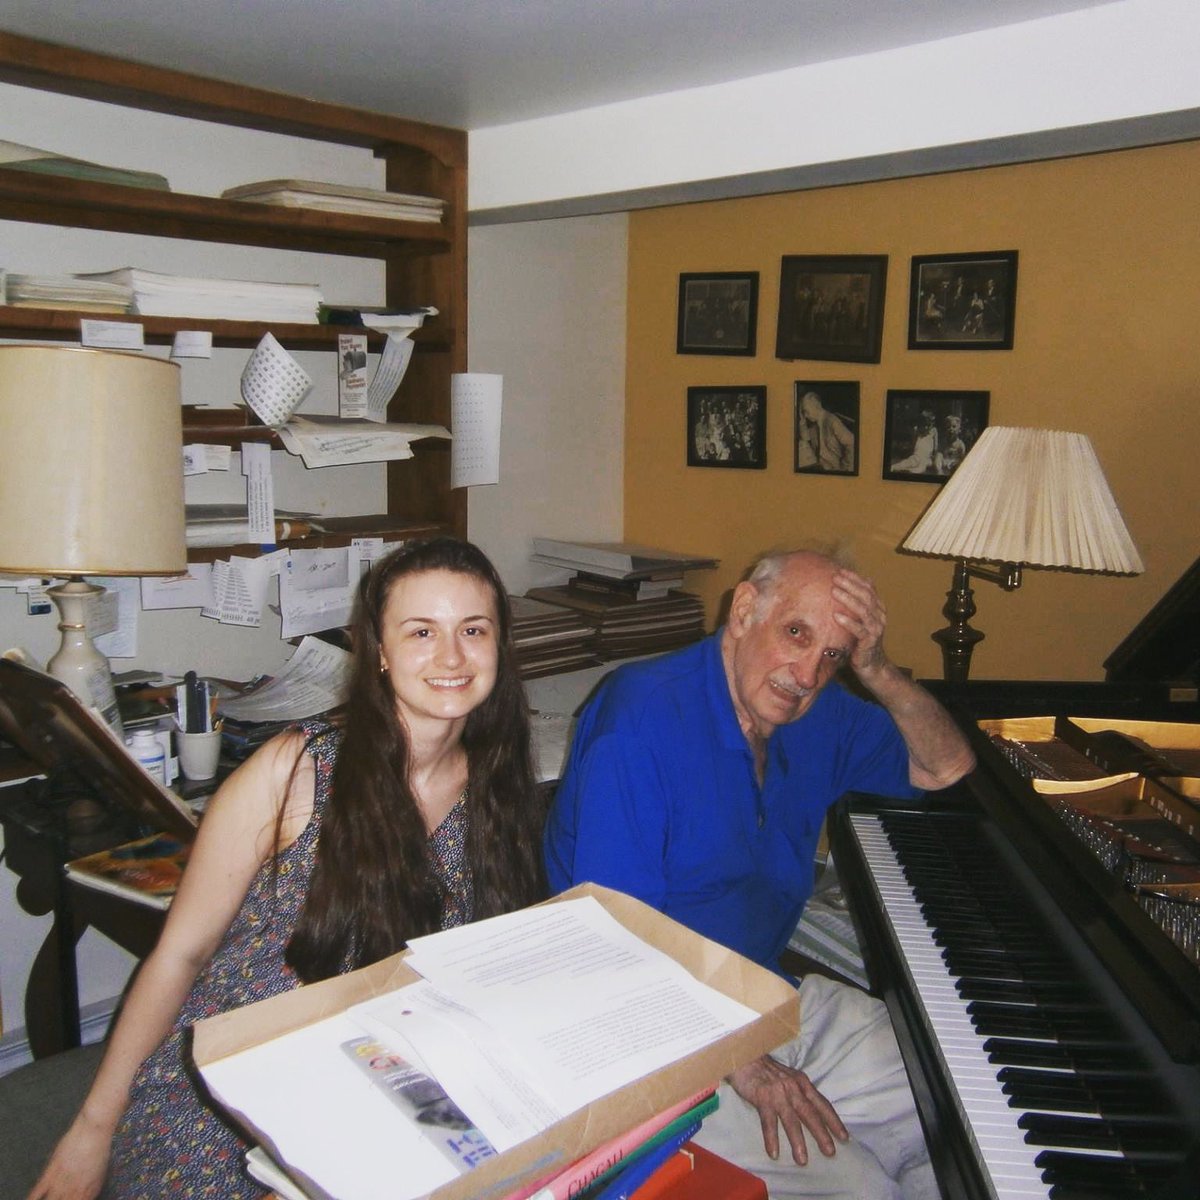 Performing his music has been one of the most exhilarating experiences I’ve ever had on stage. I’ll be eternally grateful for having had the chance to work with such a legend. For meeting him and his wonderful family. Thk U for your generosity, George. Rest in peace. #GeorgeCrumb